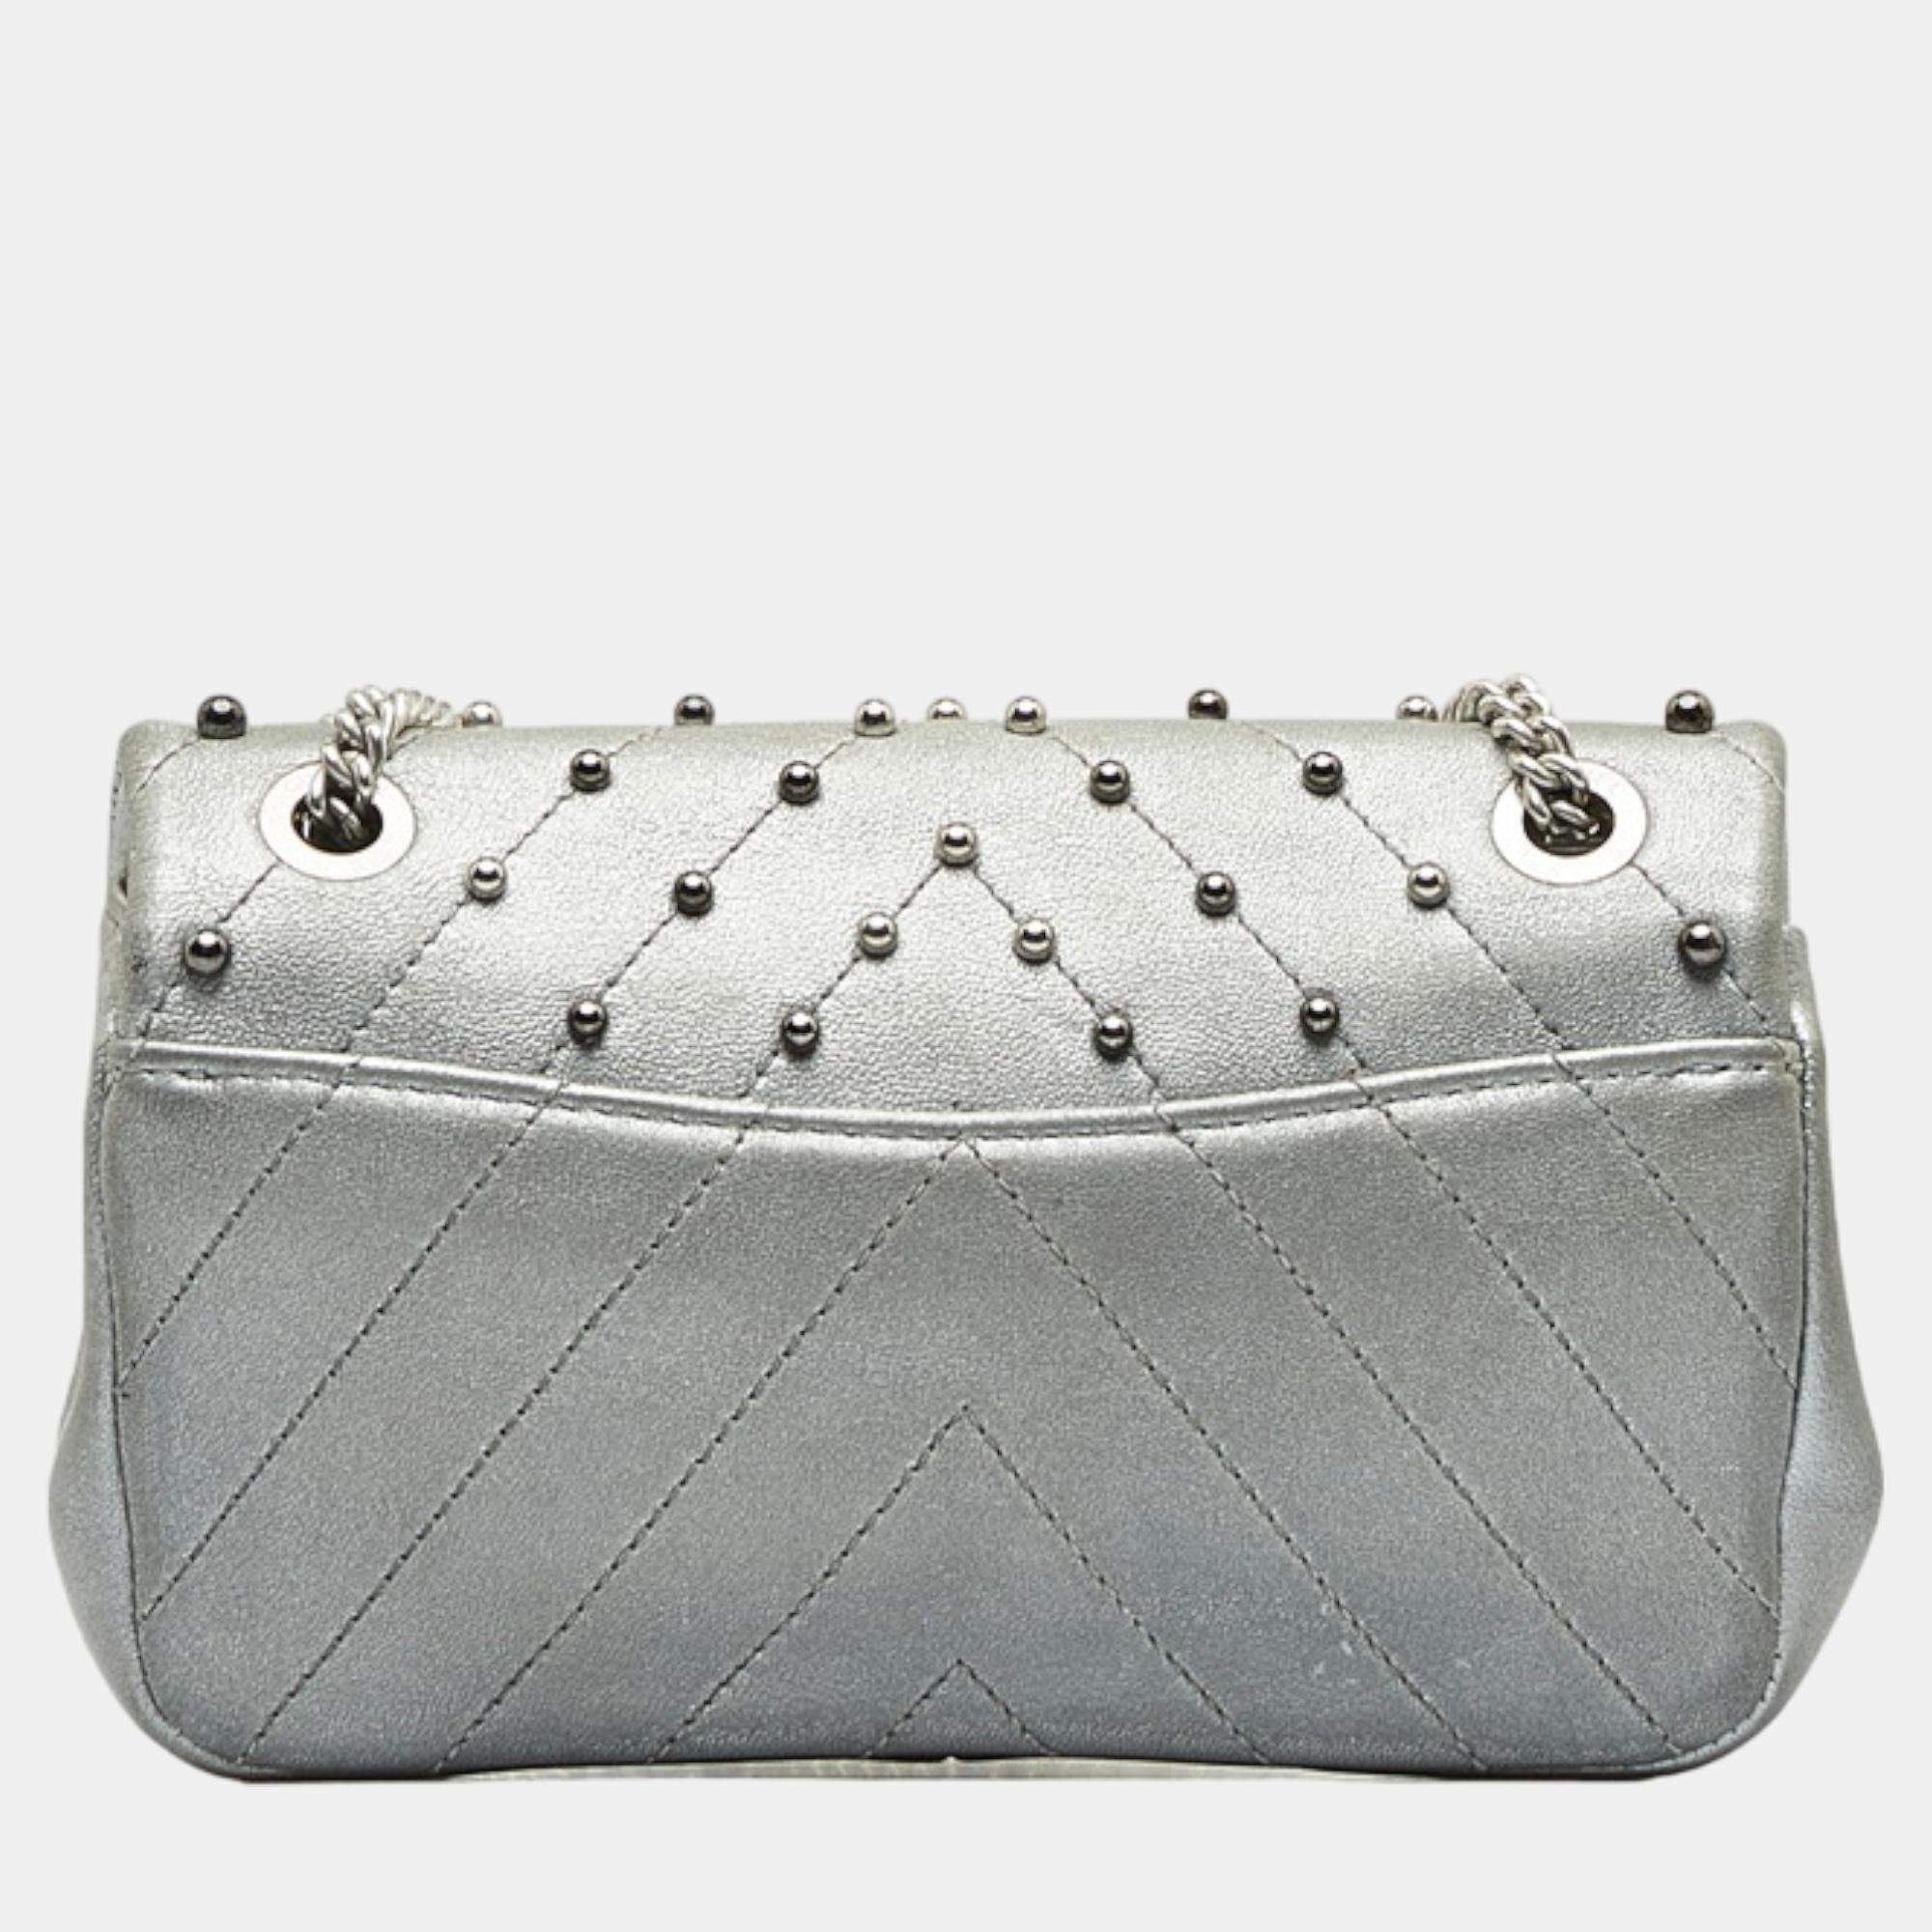 Chanel Silver Leather CC Chevron Studded Leather Flap Bag